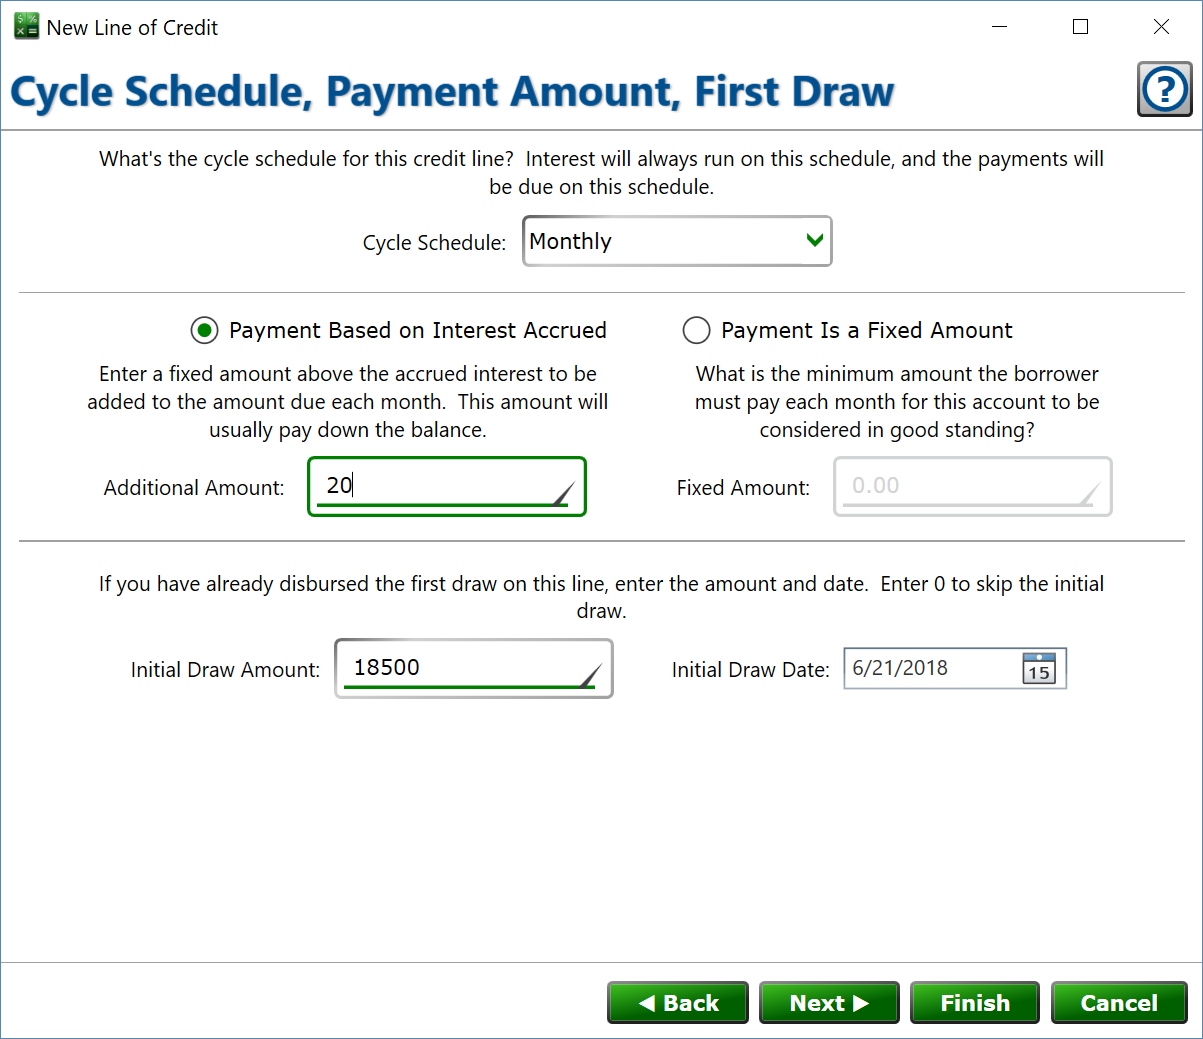 Screenshot of the Cycle Schedule, Payment Amount, First Draw window of the Revolving Line of Credit wizard.